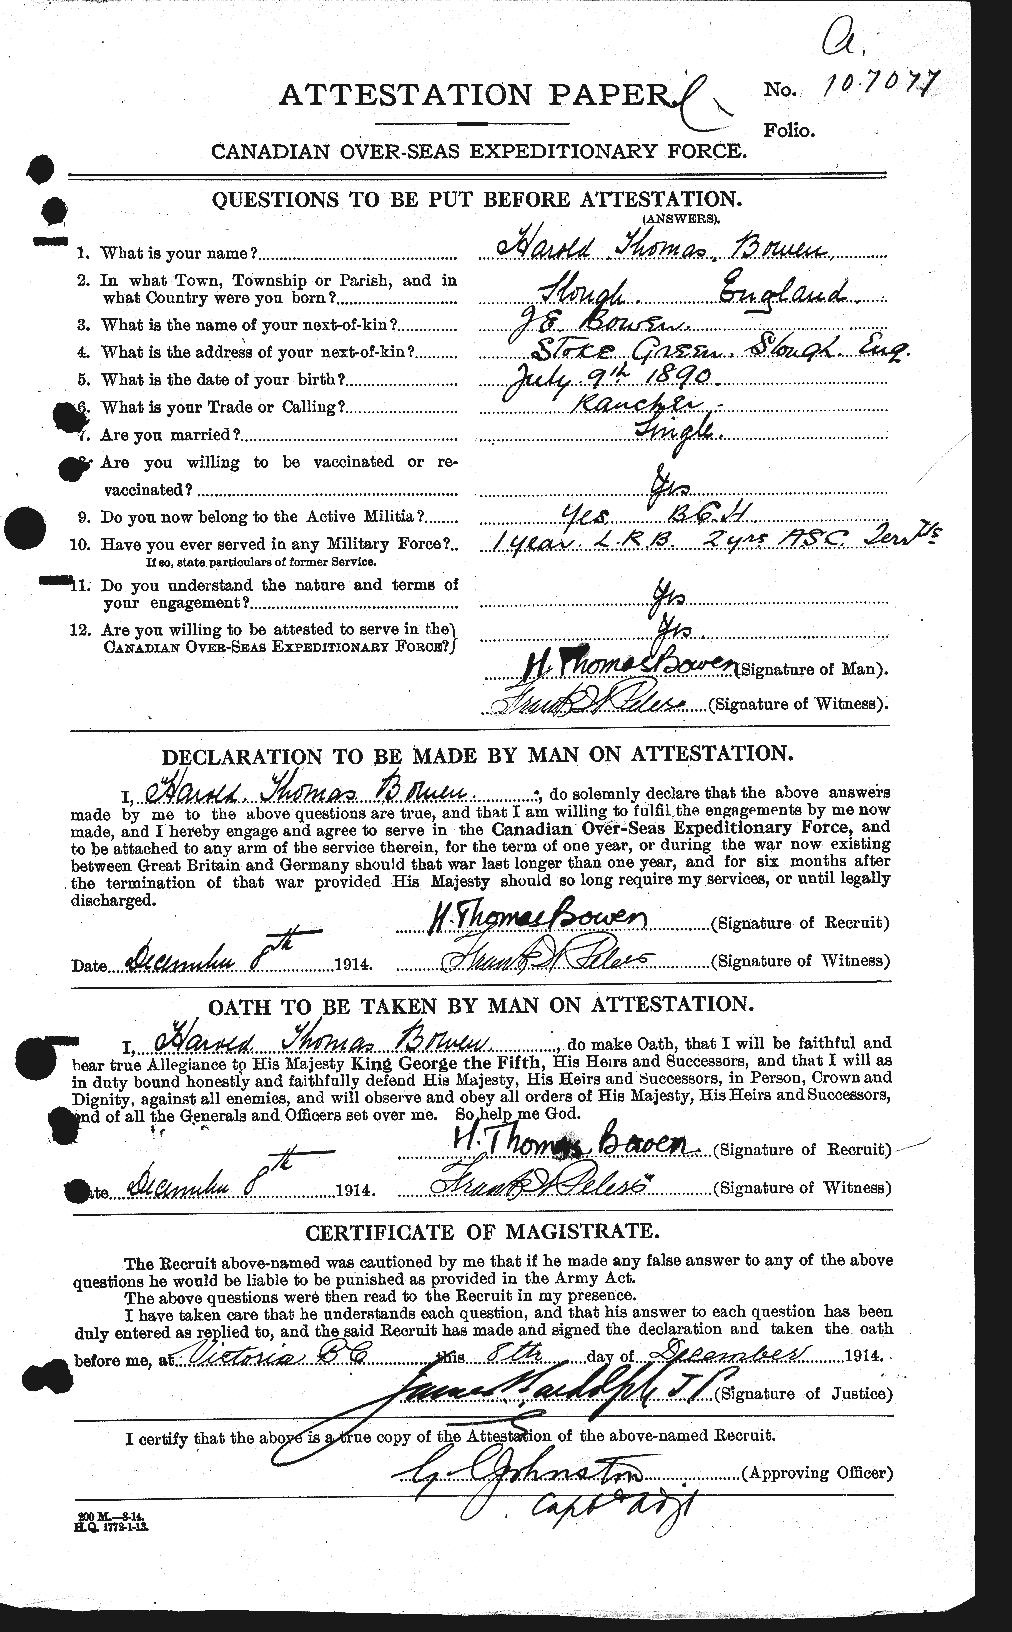 Personnel Records of the First World War - CEF 255411a